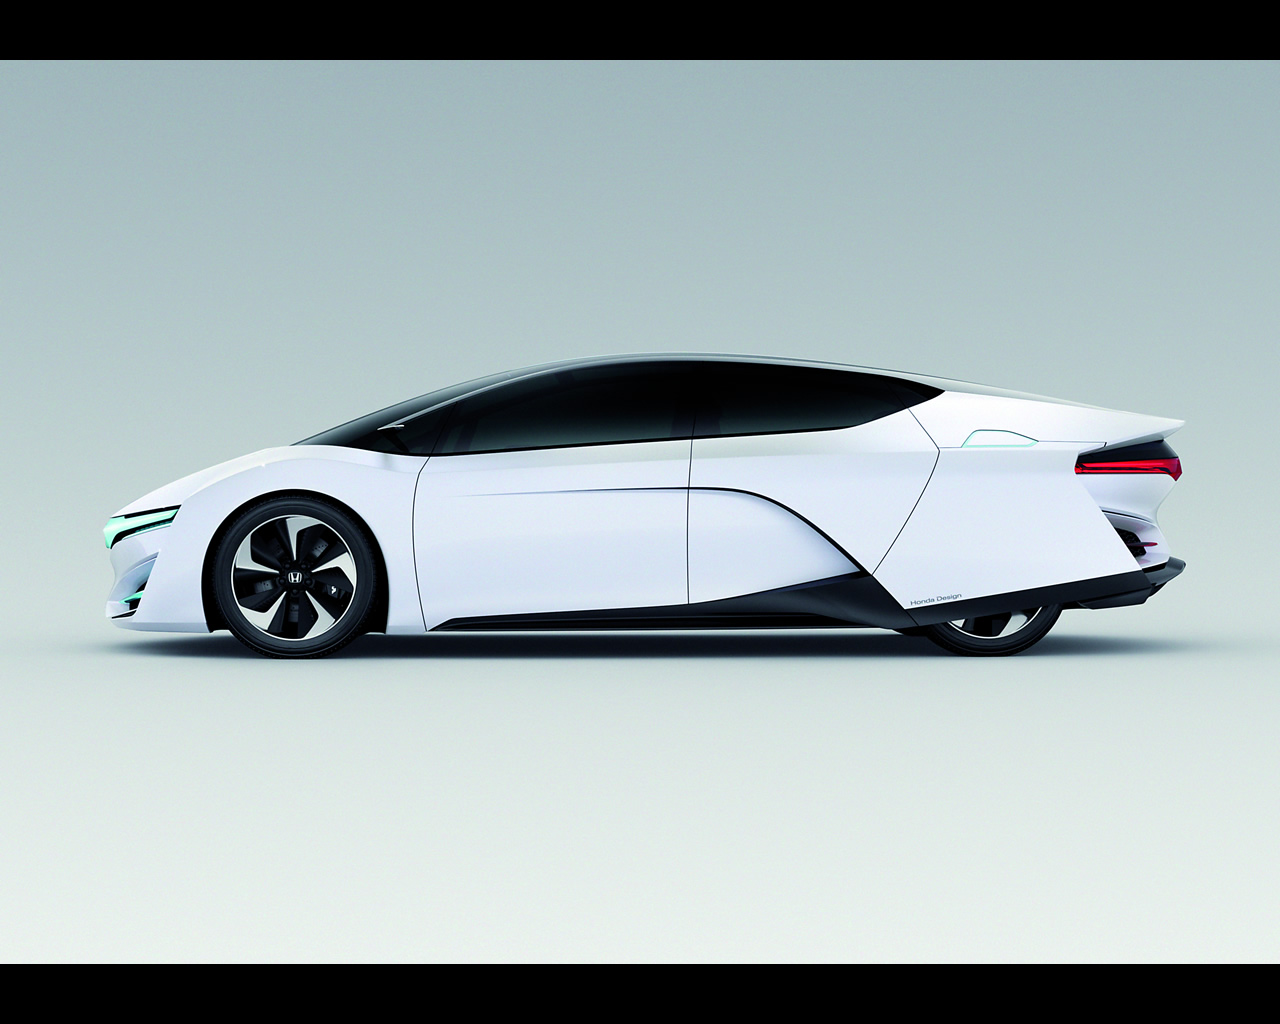 Wallpapers : Honda FCV Hydrogen Fuel Cell Electric Vehicle Design ...